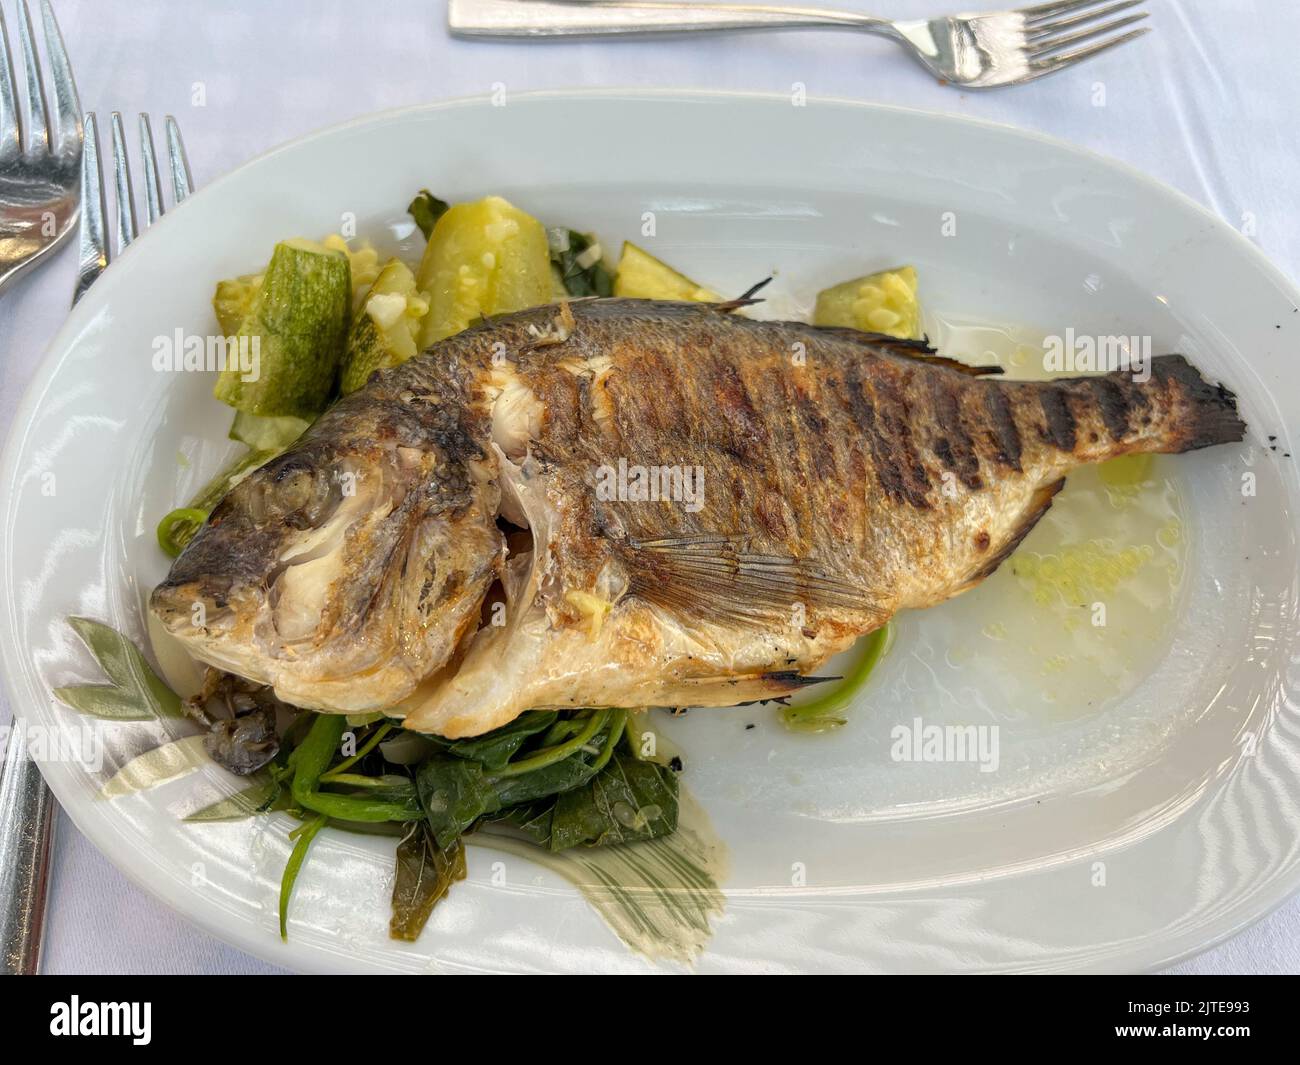 Grilled sea bass served with vegetables Stock Photo